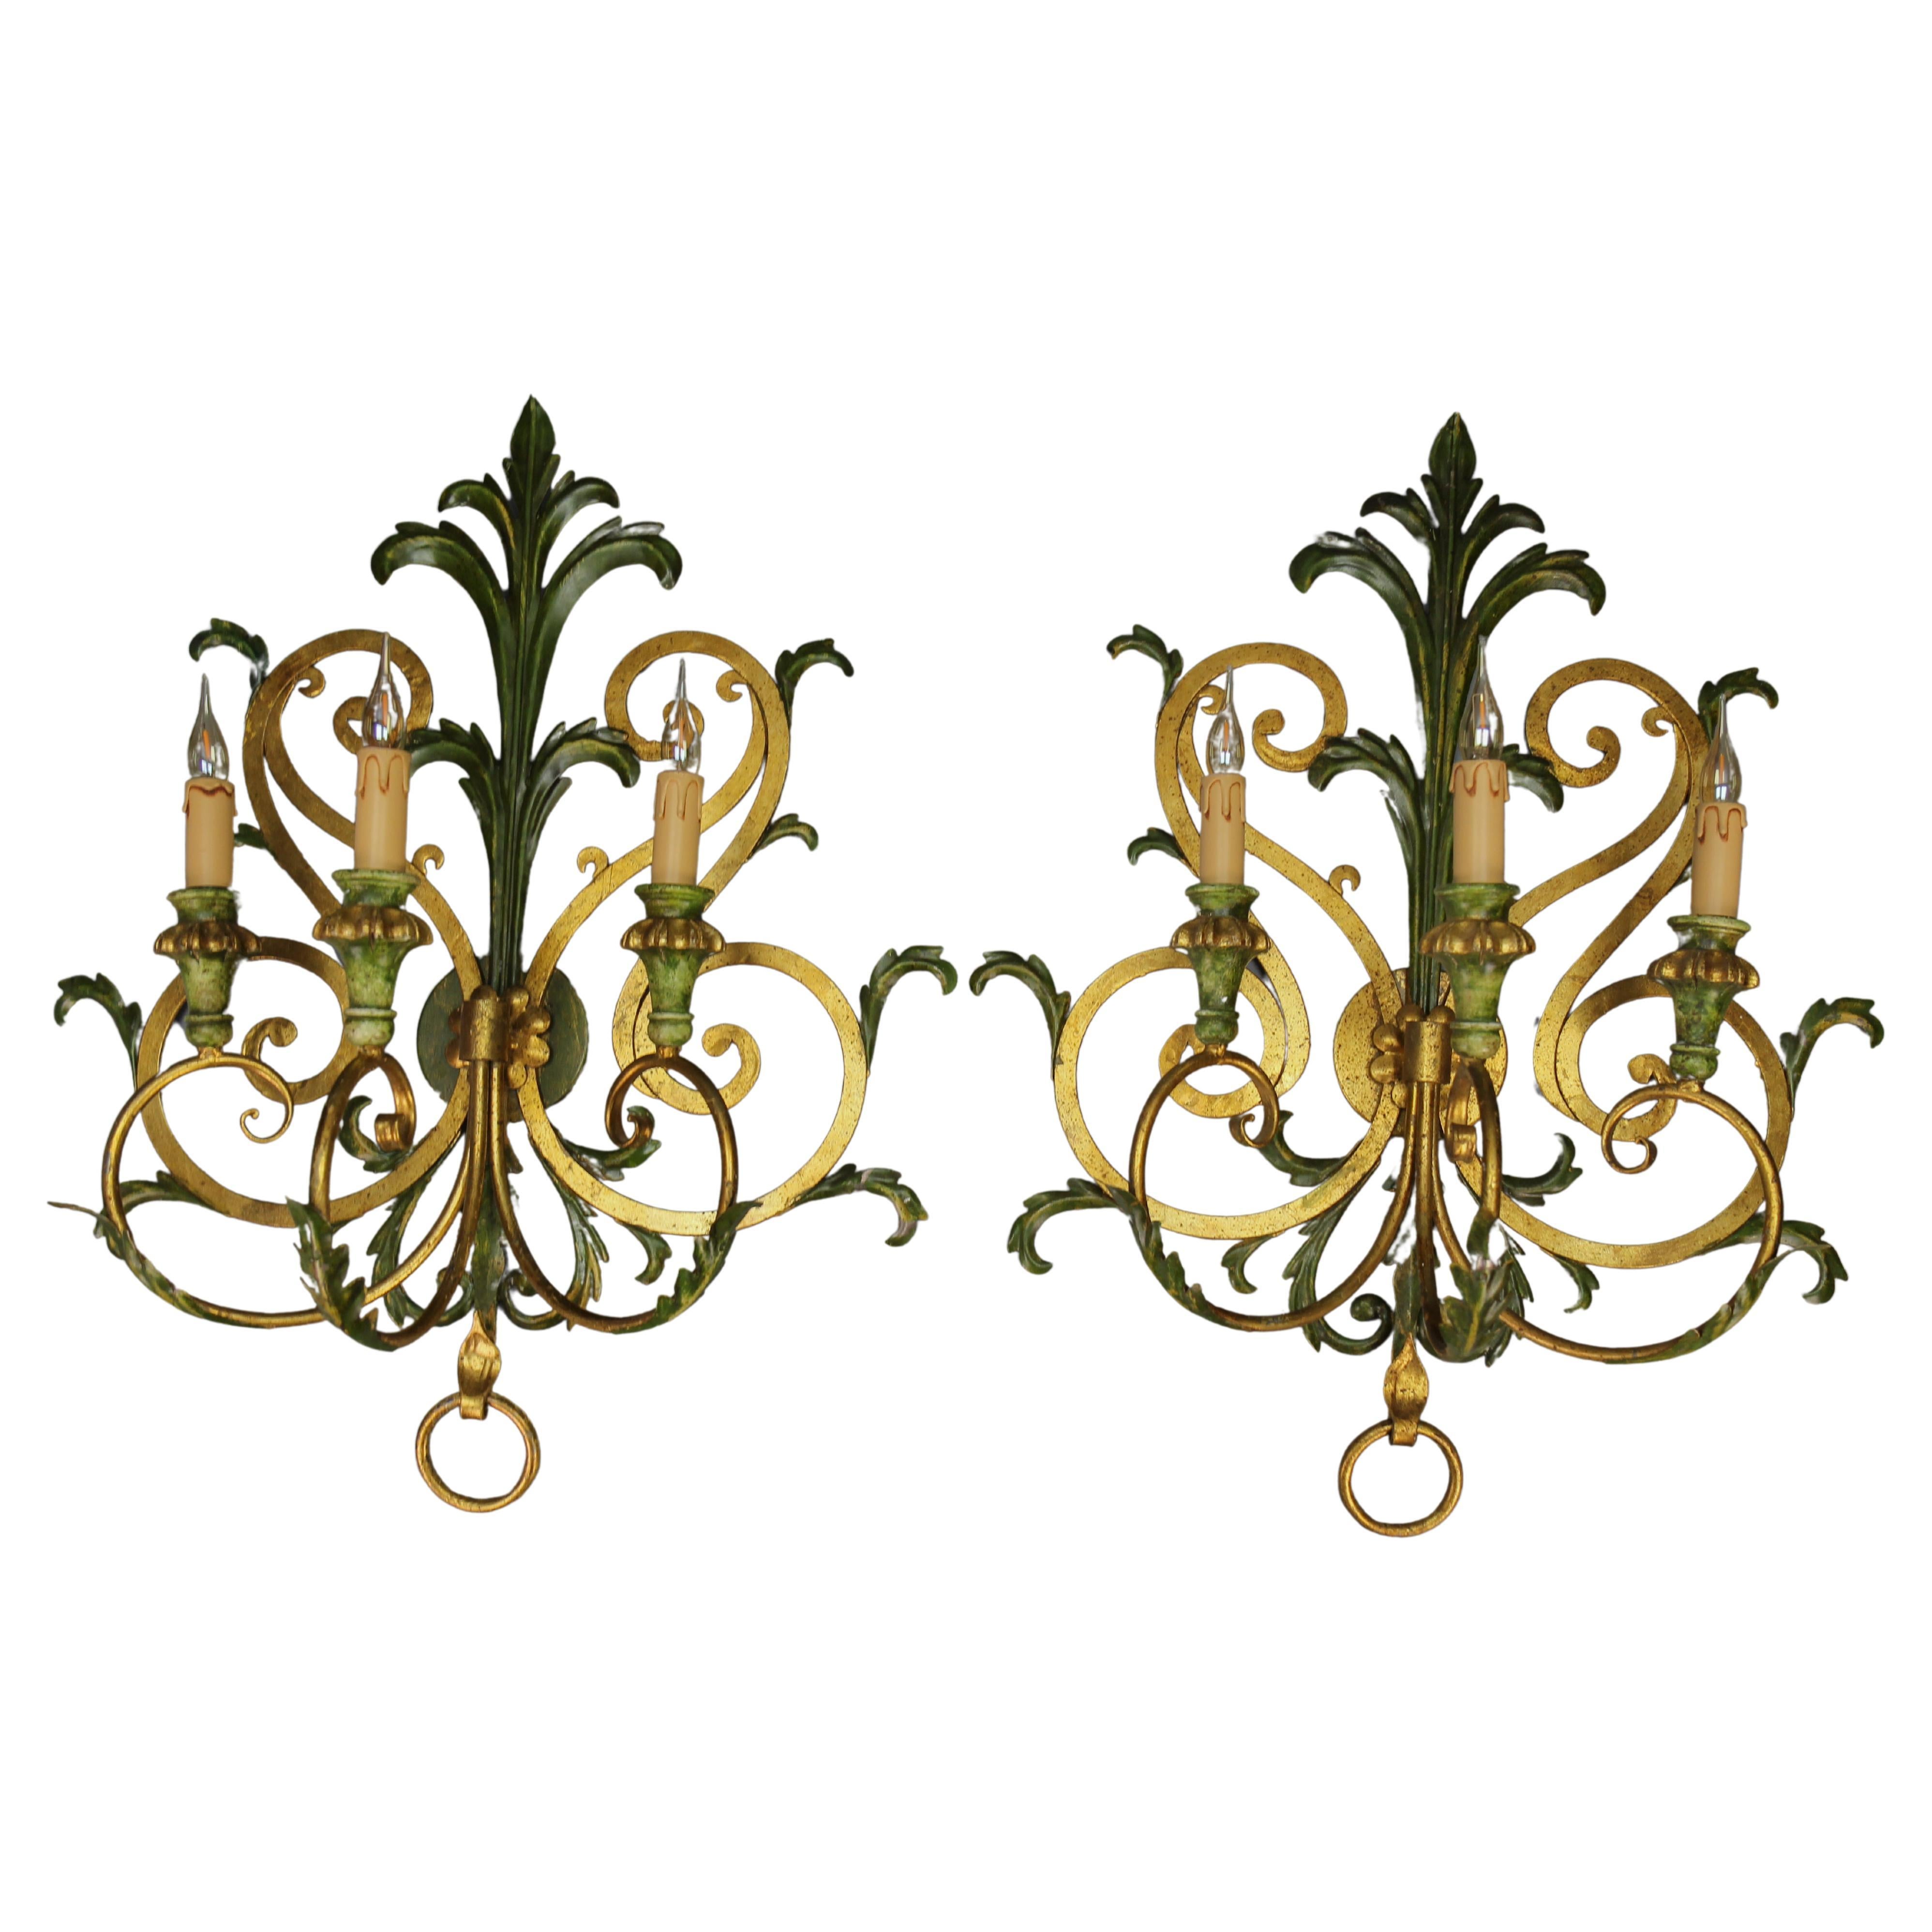 A Pair of Large Gilt and Green Color Metal and Wood Sconces, Italy, ca. 1960s For Sale